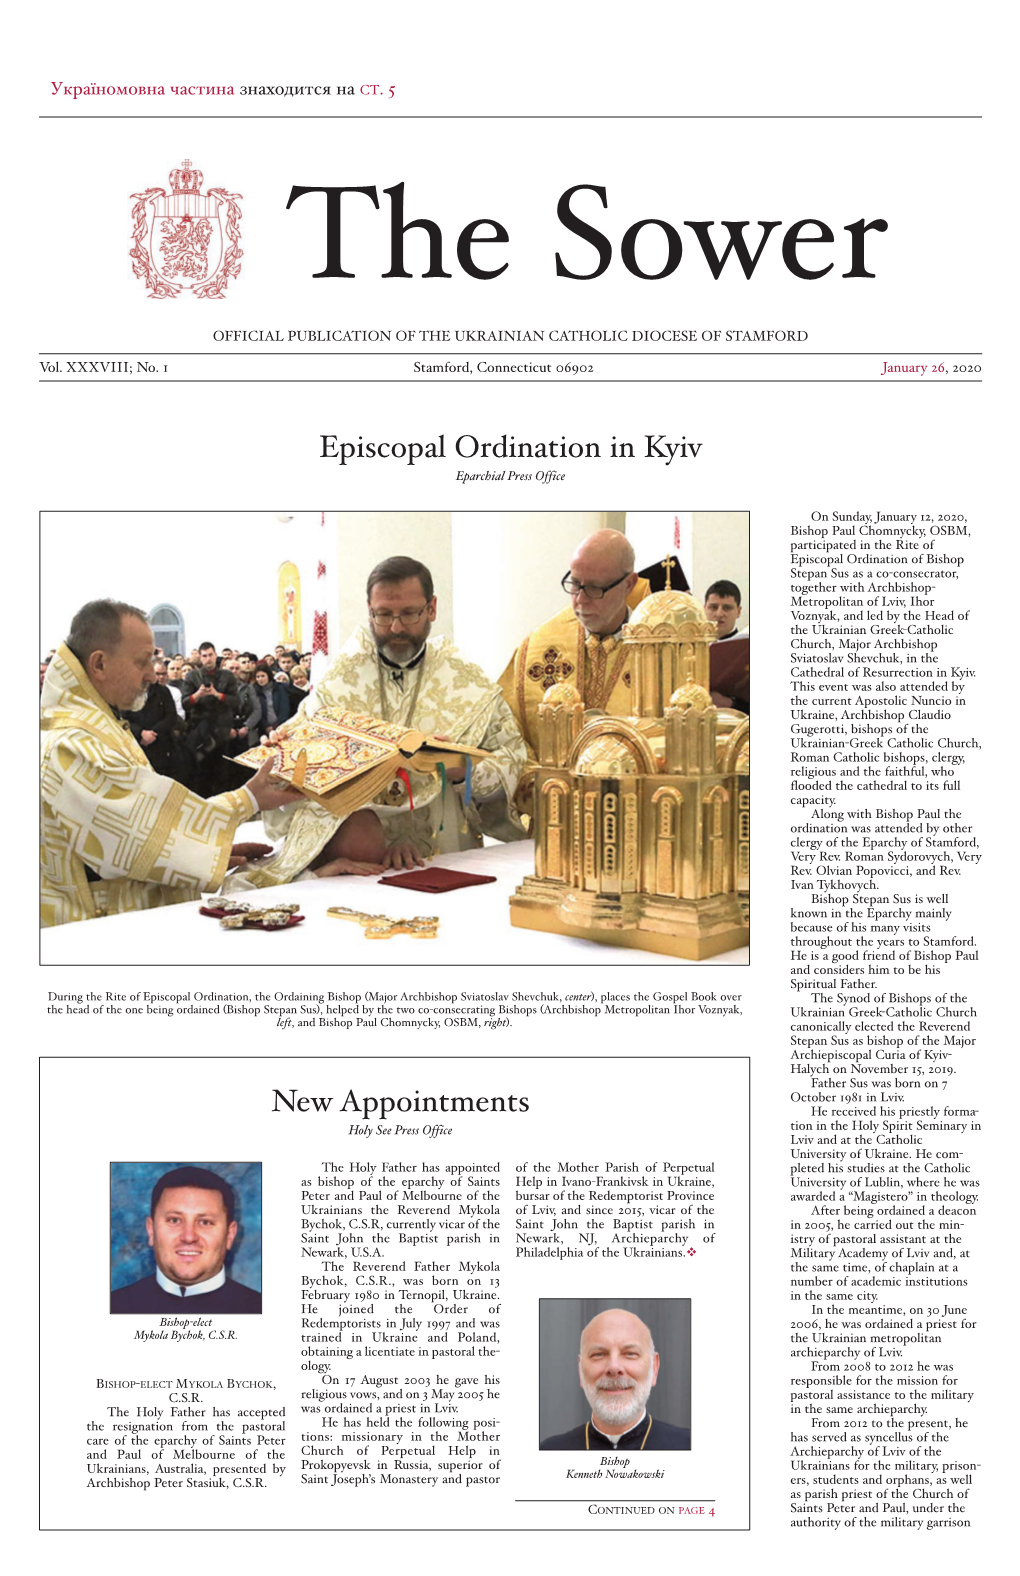 The Sower OFFICIAL PUBLICATION of the UKRAINIAN CATHOLIC DIOCESE of STAMFORD